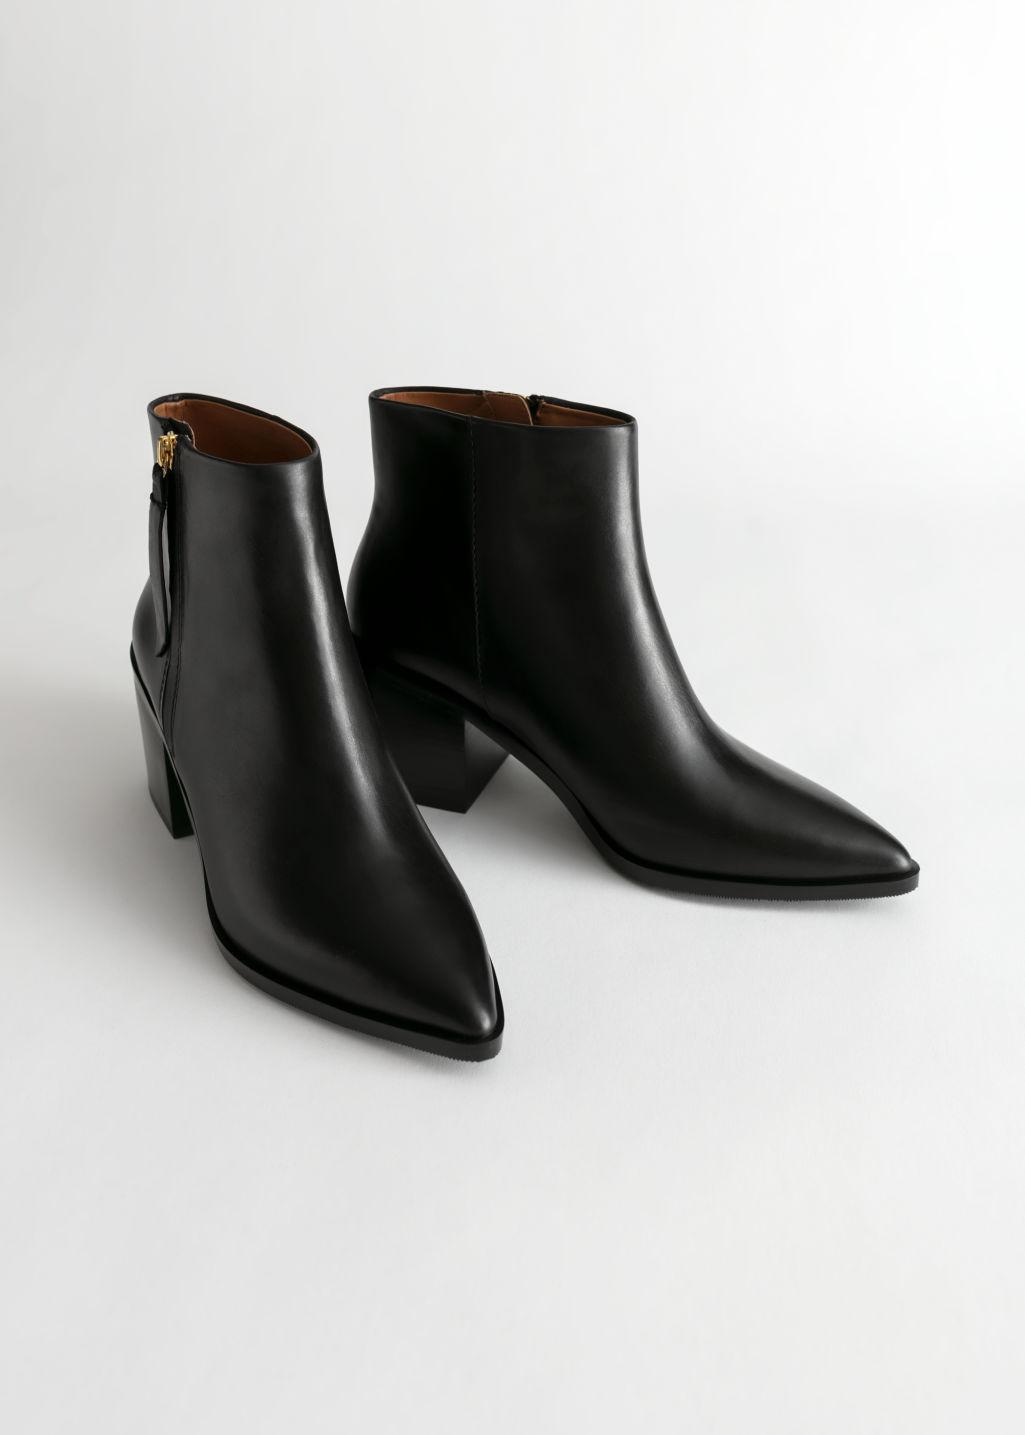 & Other Stories Pointed Leather Ankle Boots in Black | Lyst